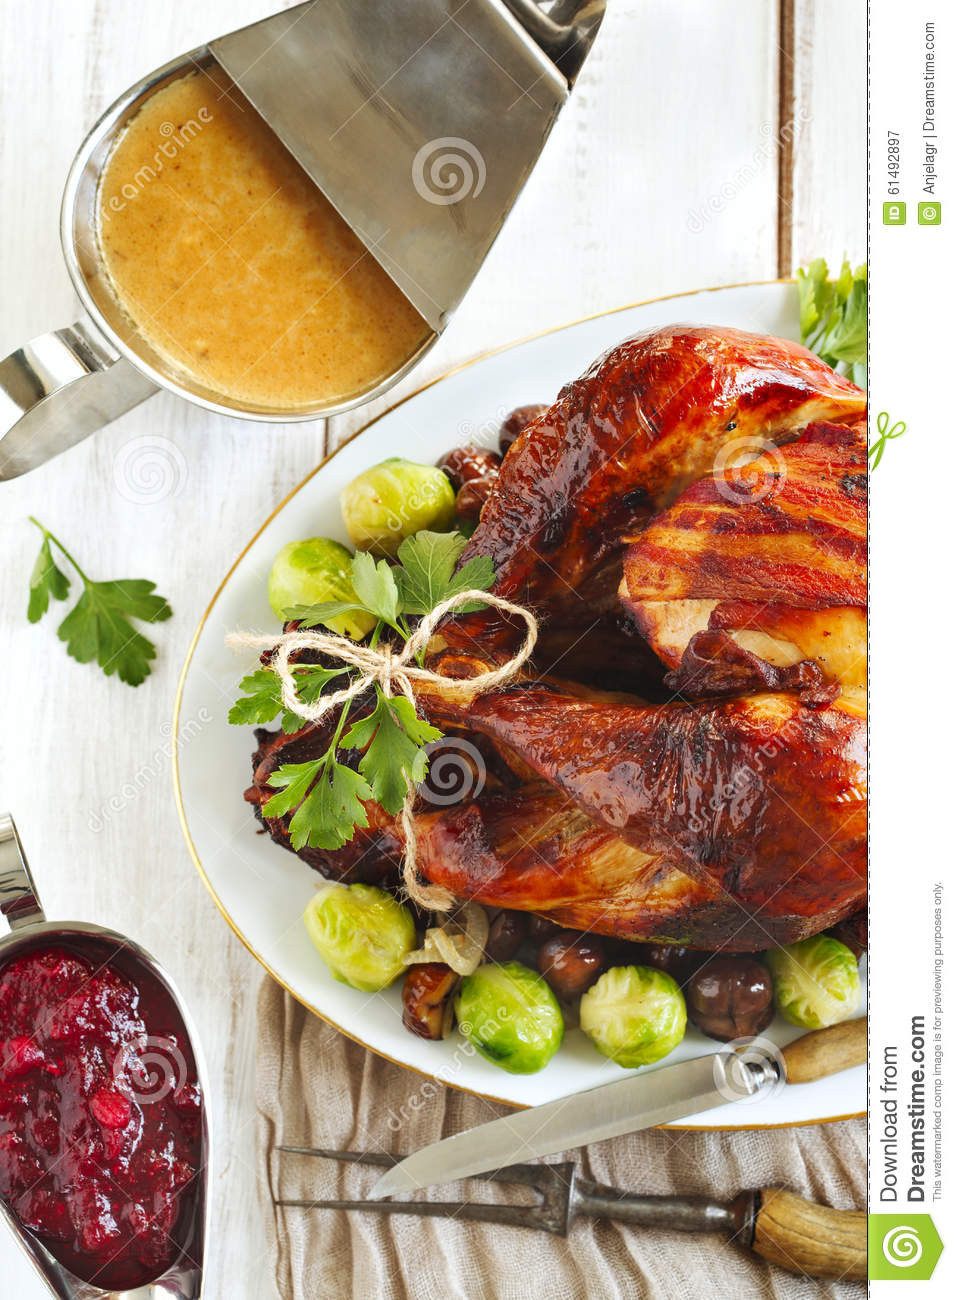 Prepared Thanksgiving Turkey
 Roasted Turkey With Bacon And Garnished With Chestnuts And